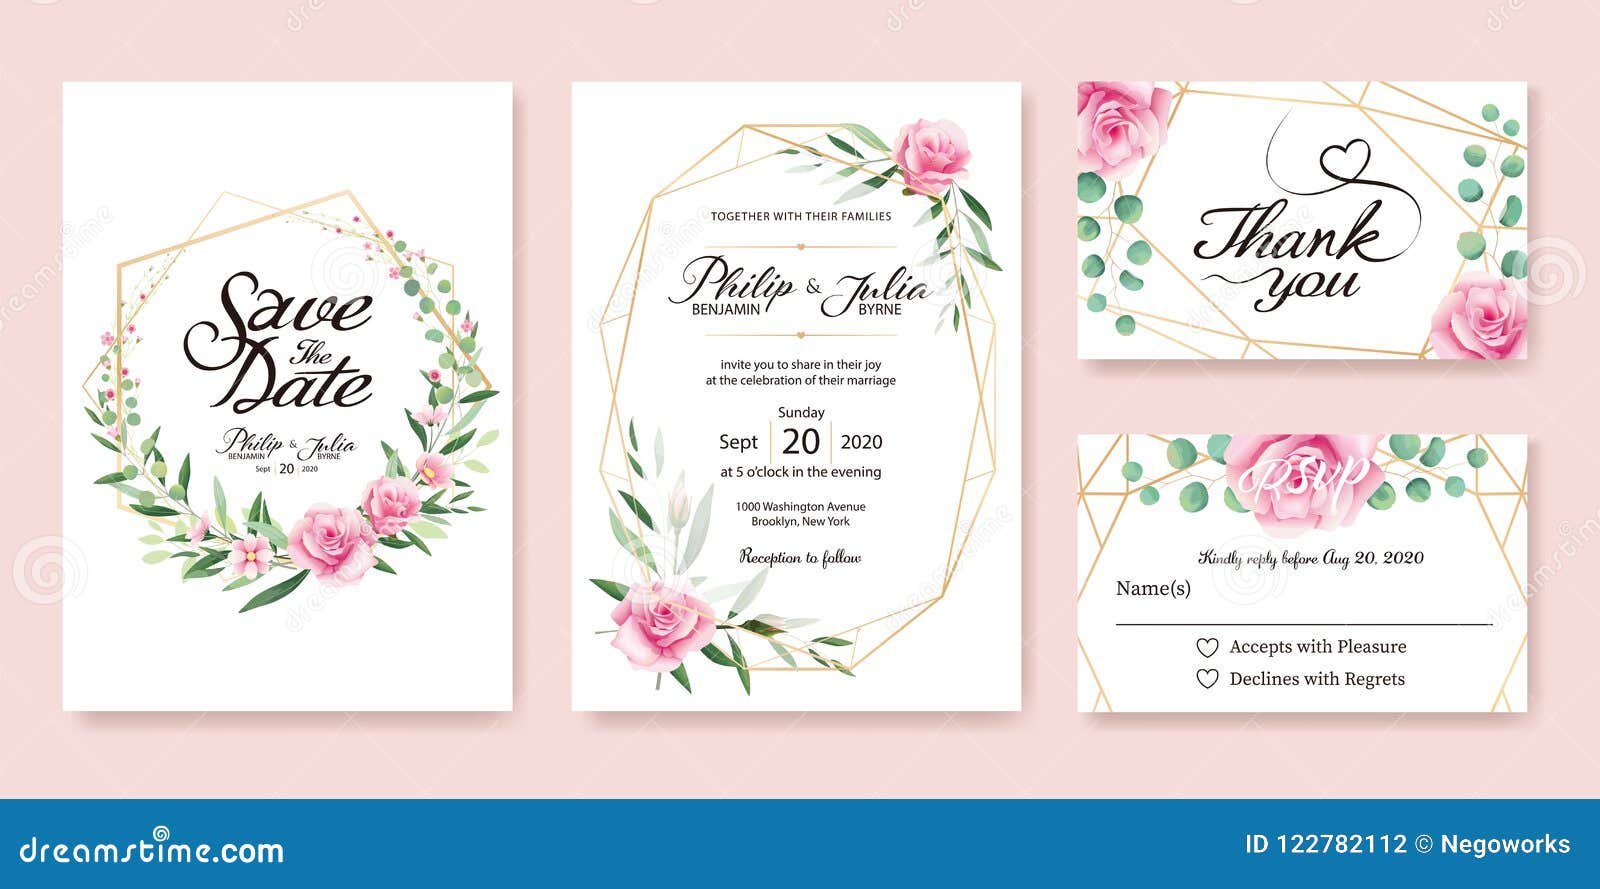 Wedding Invitation, Save the Date, Thank You, Rsvp Card Design Intended For Free Printable Wedding Rsvp Card Templates